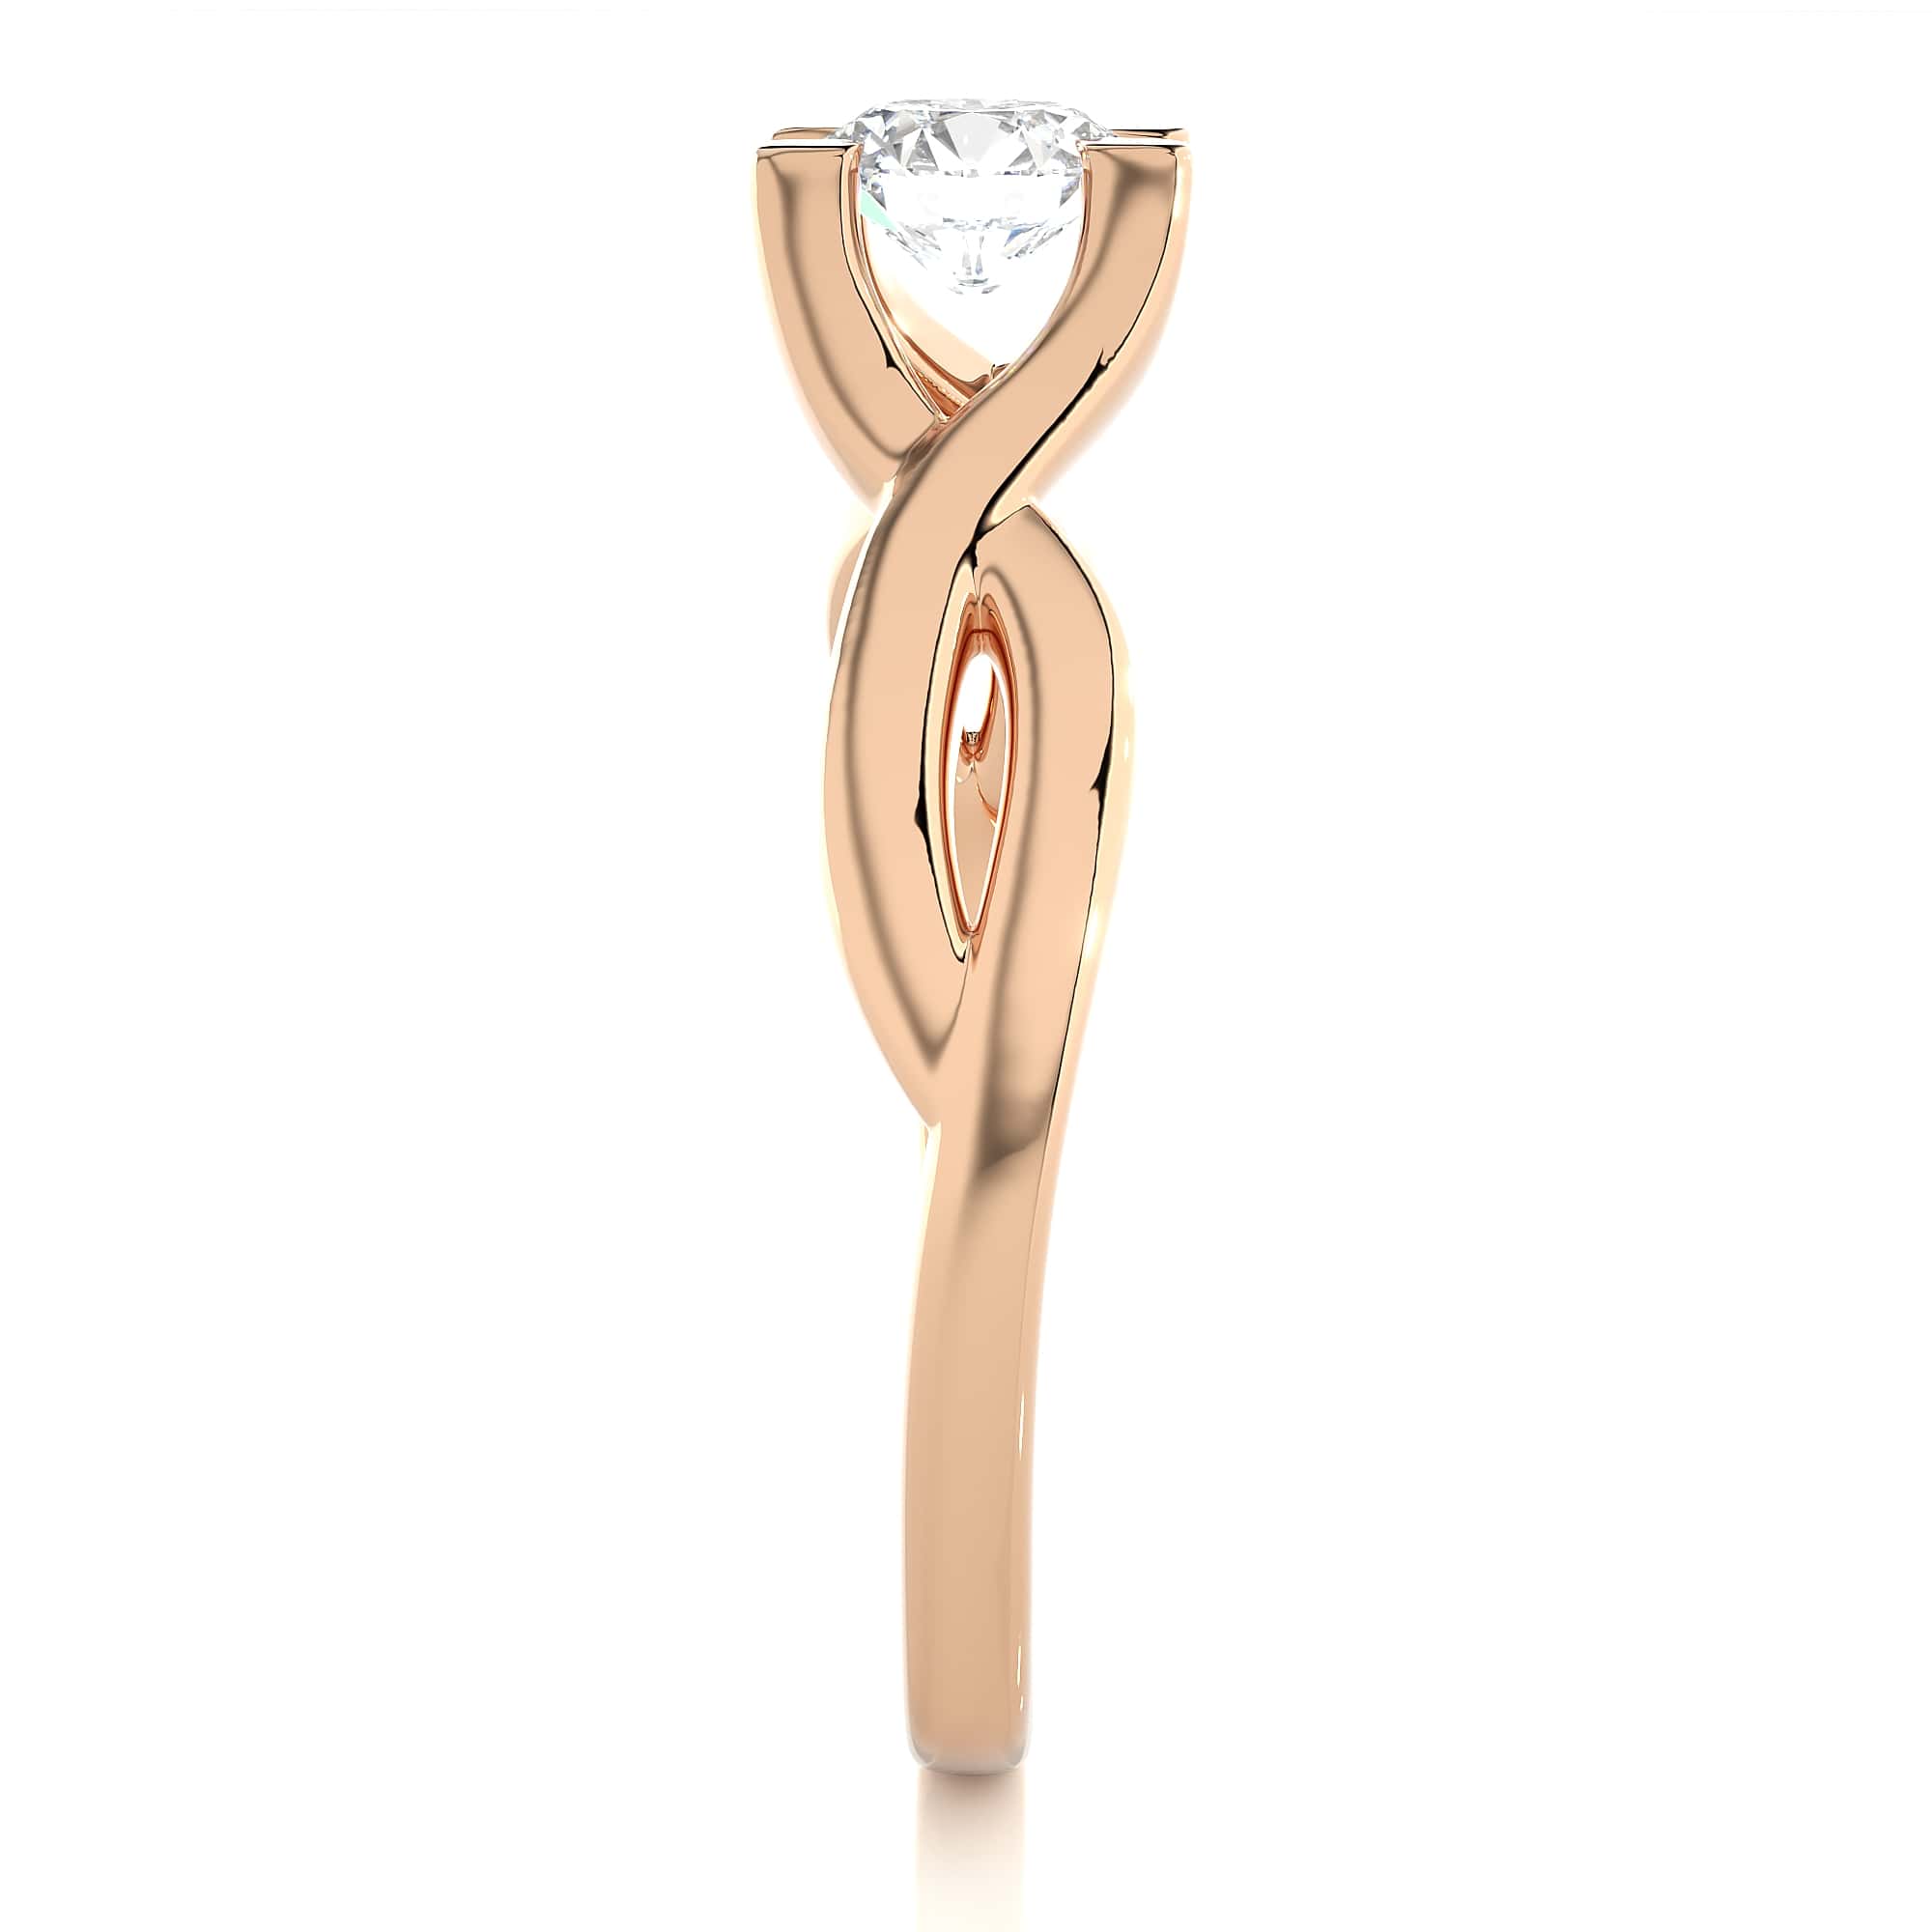 Designed Solitaire Ring RG